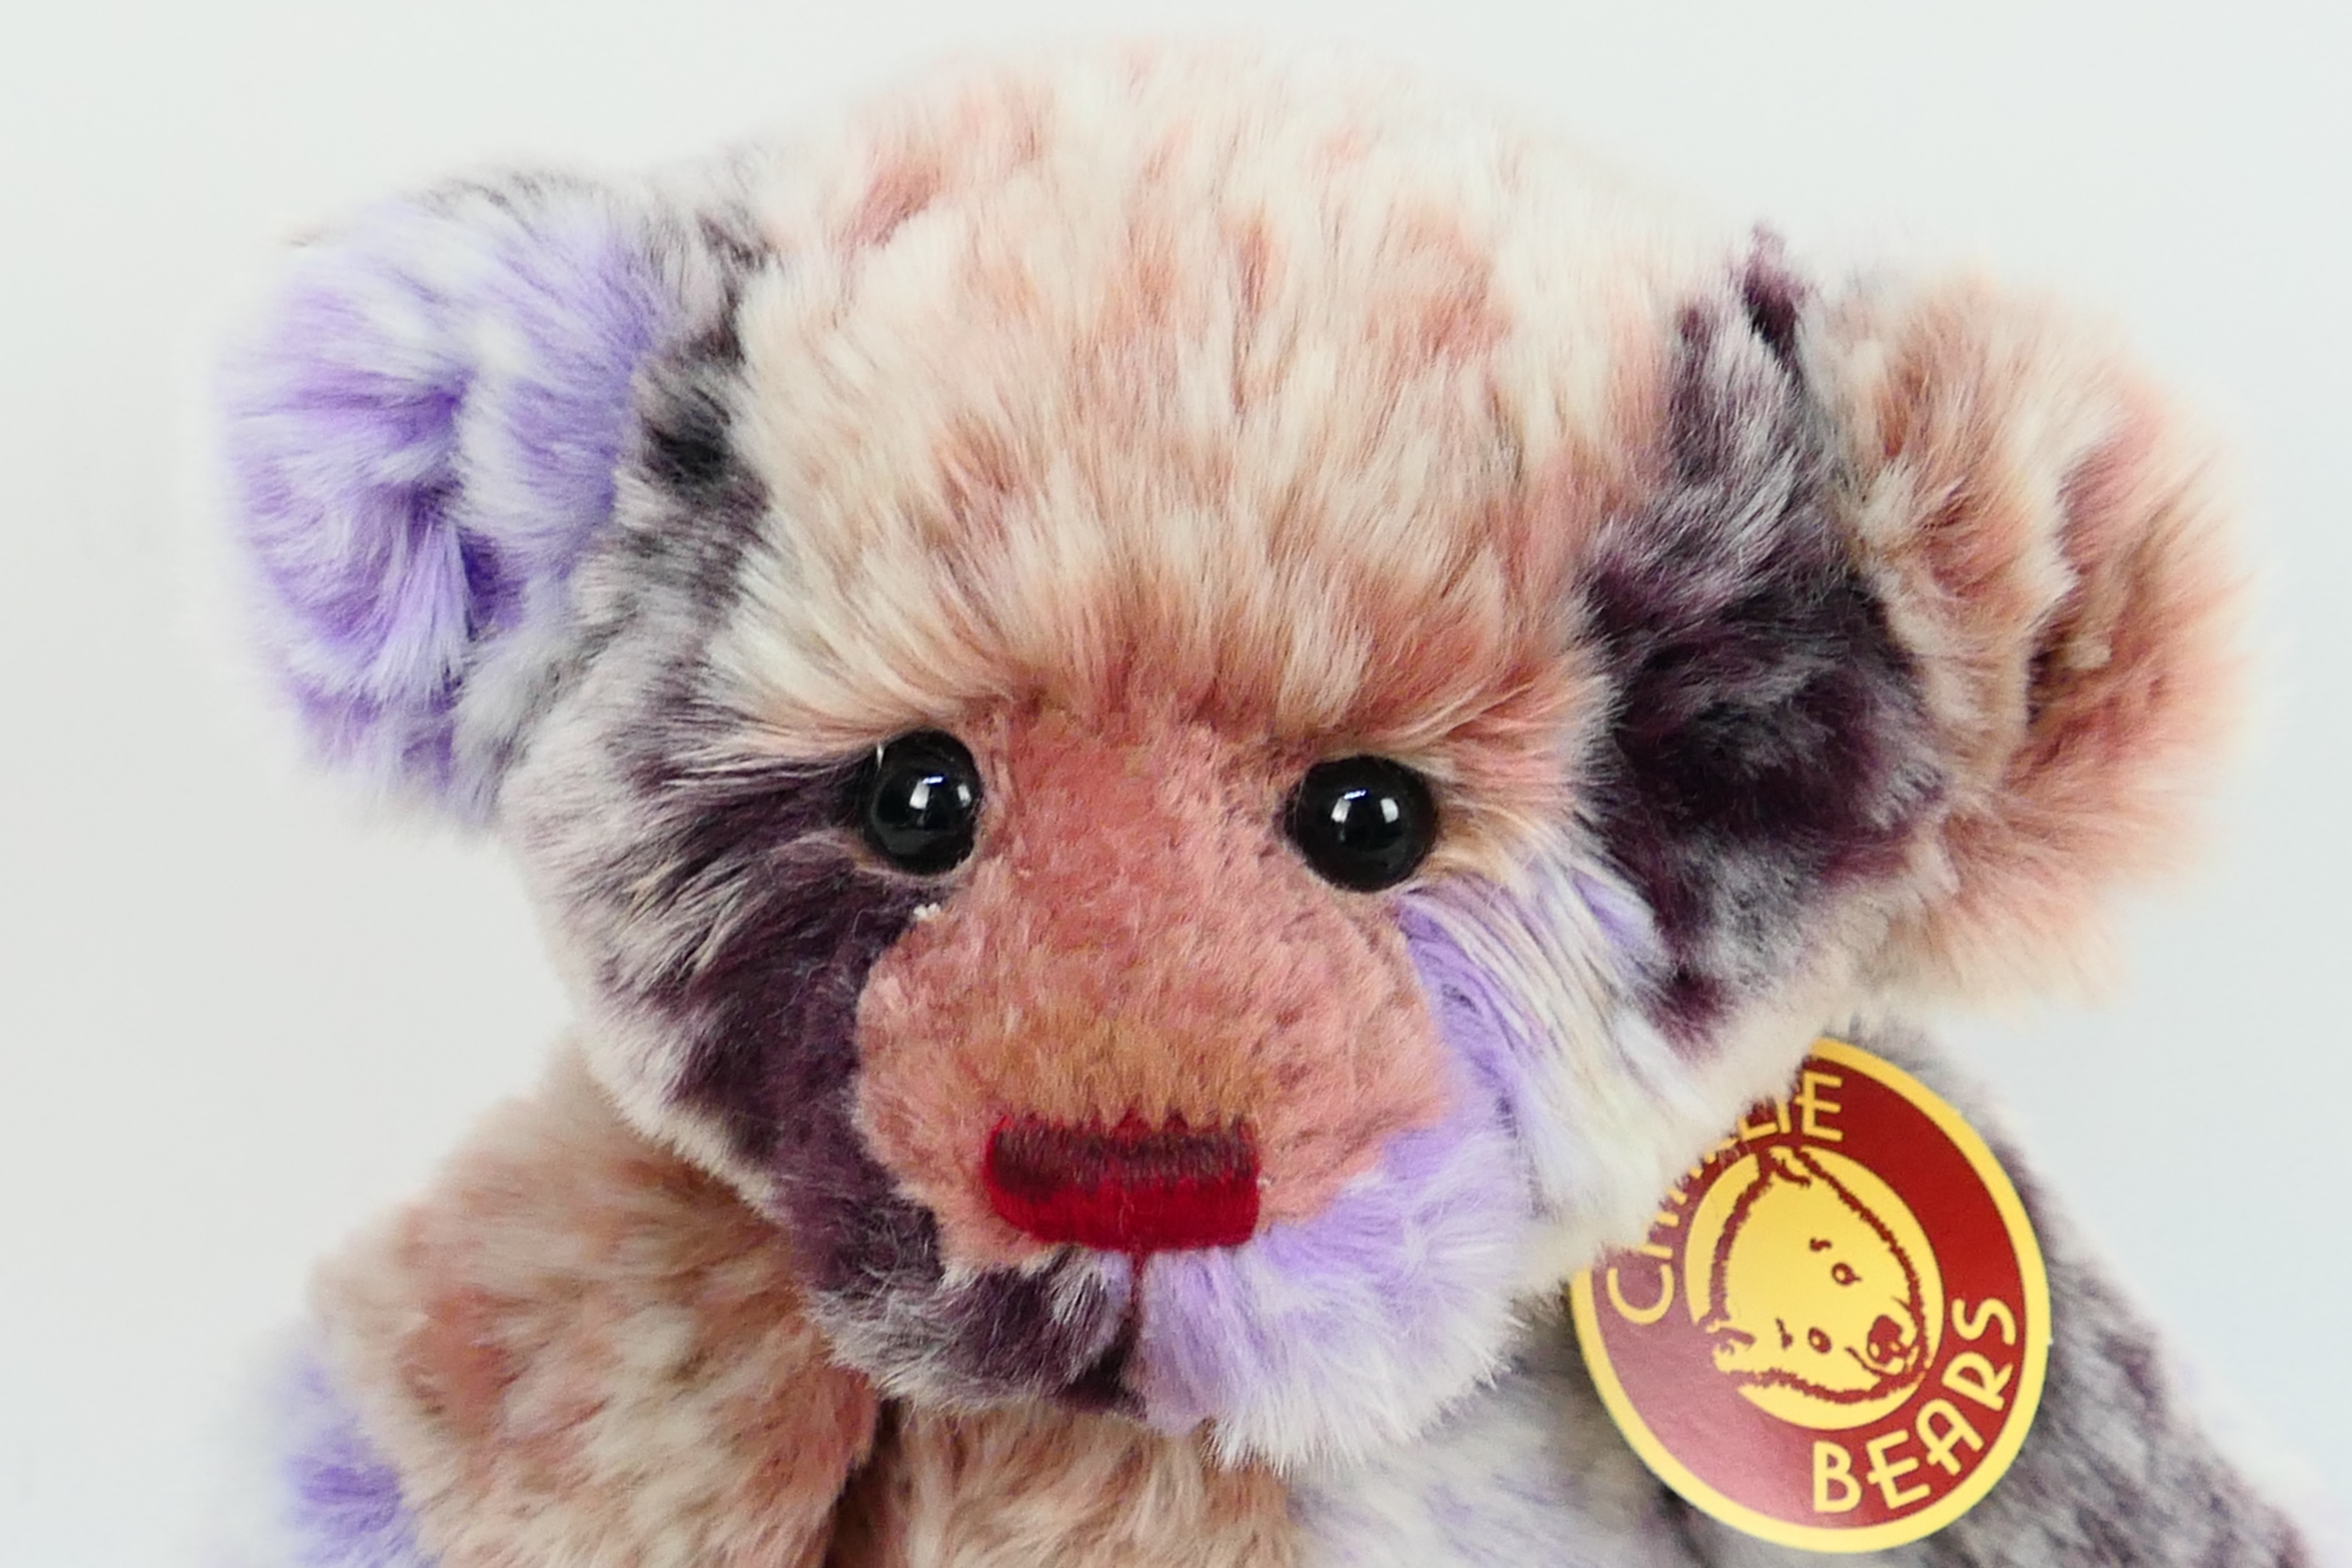 Charlie Bears - A Charlie Bears soft toy teddy bear #CB604748C 'Ragsy', designed by Isabelle Lee, - Image 3 of 5